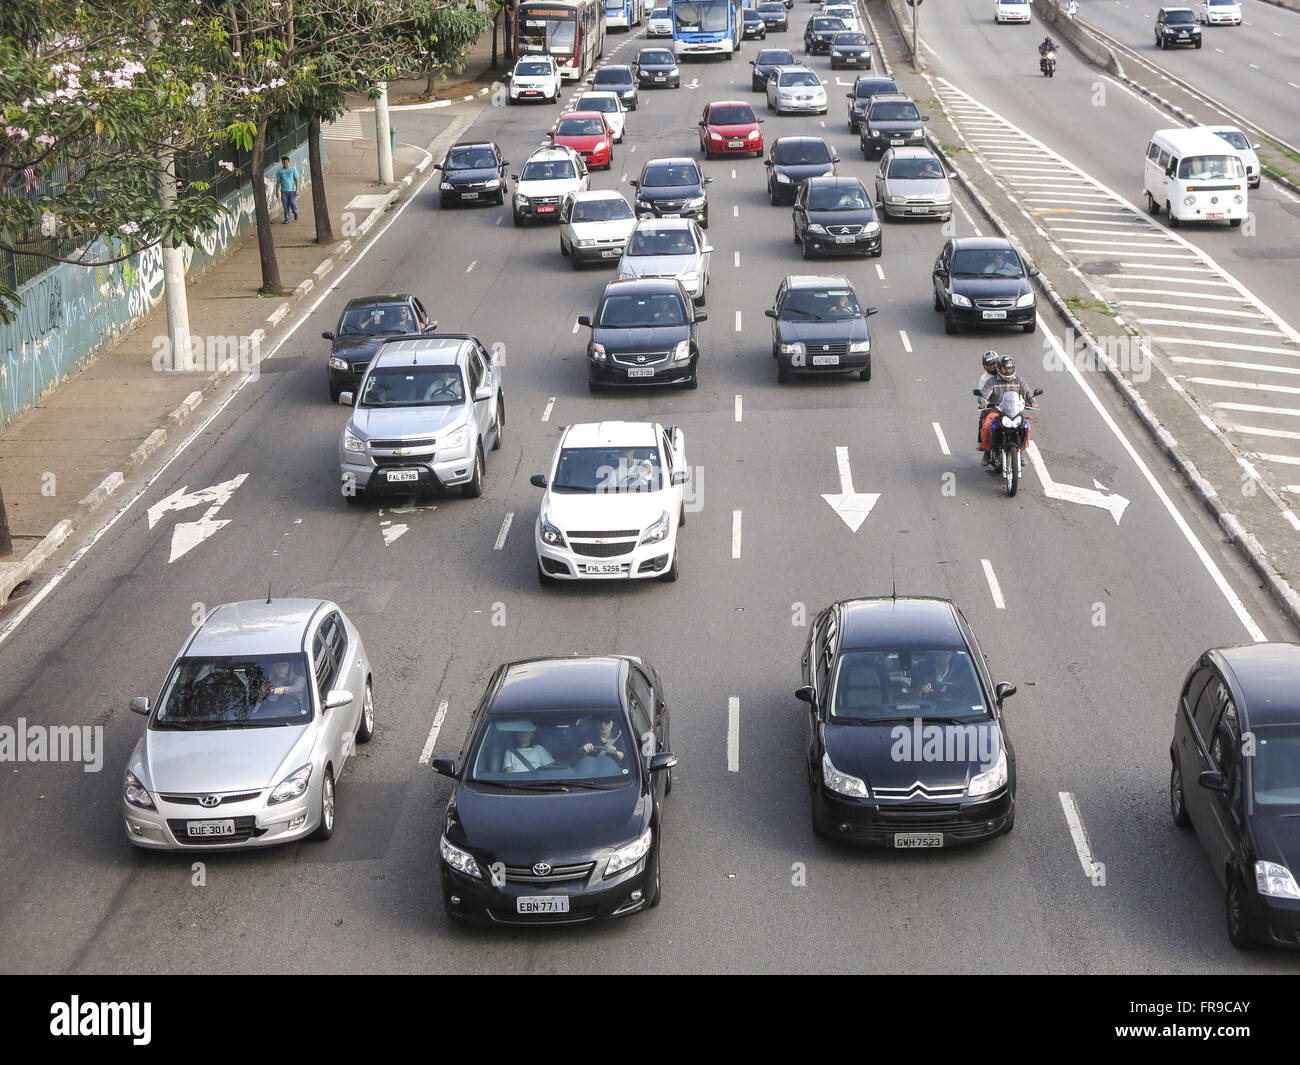 Vehicular traffic in city avenue Stock Photo